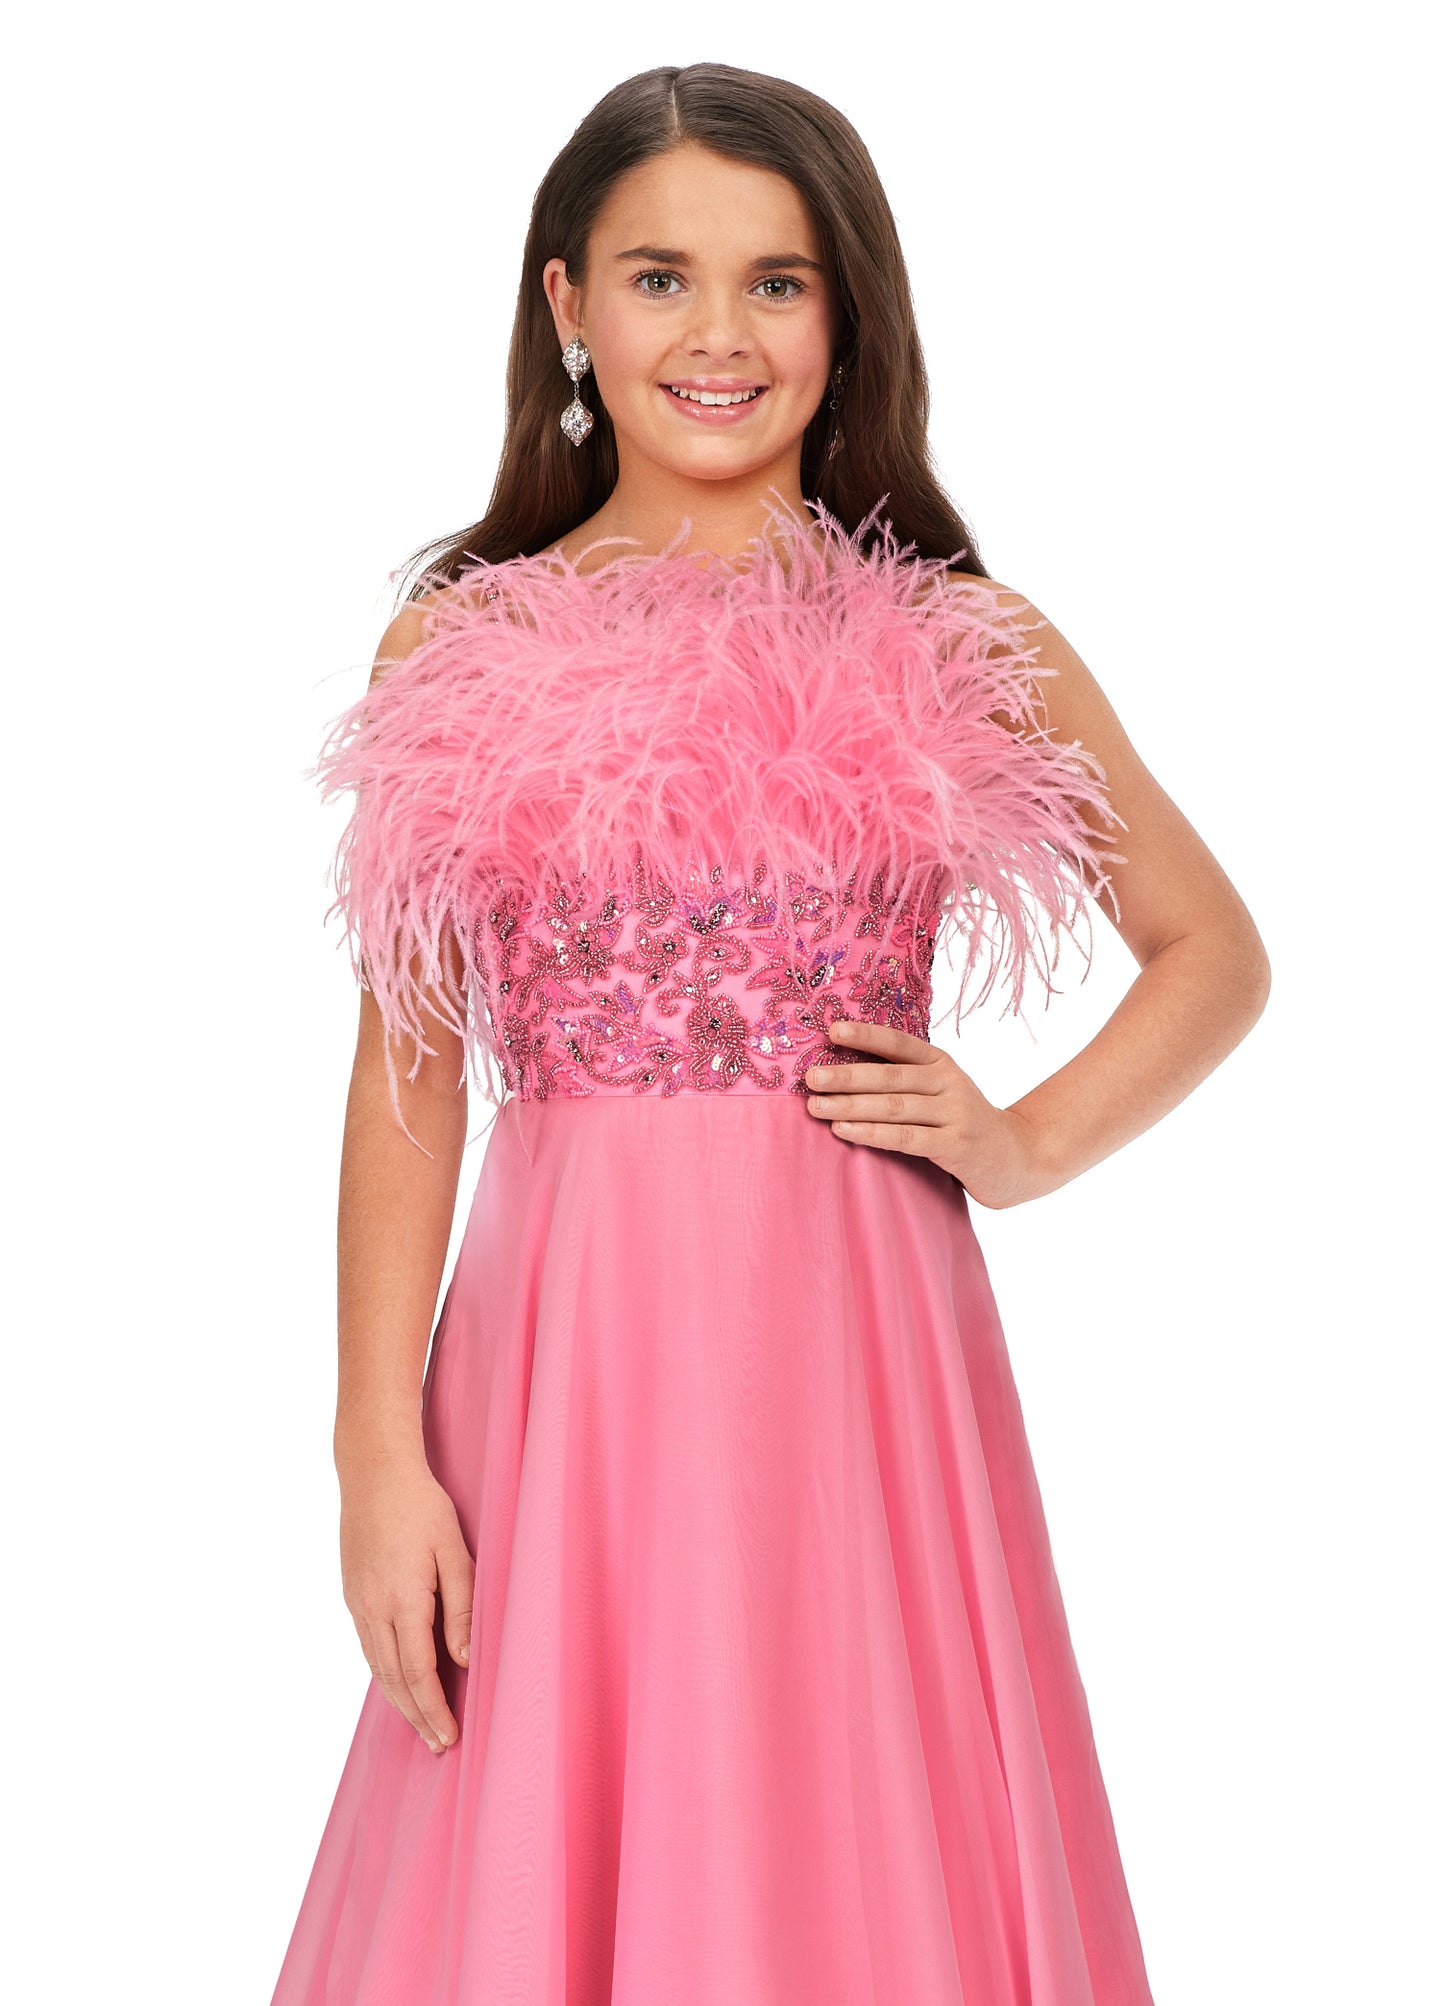 The Ashley Lauren Kids 8236 Long Girls A Line Chiffon Feather Beaded Pageant Ballgown Dress is the perfect choice for pageants. Featuring a beaded bustier and feather details, this A-Line dress with spaghetti straps is sure to stand out. Show-stoppingly beautiful.  Sizes: 4-16  Colors: Red, Ivory, Candy Pink